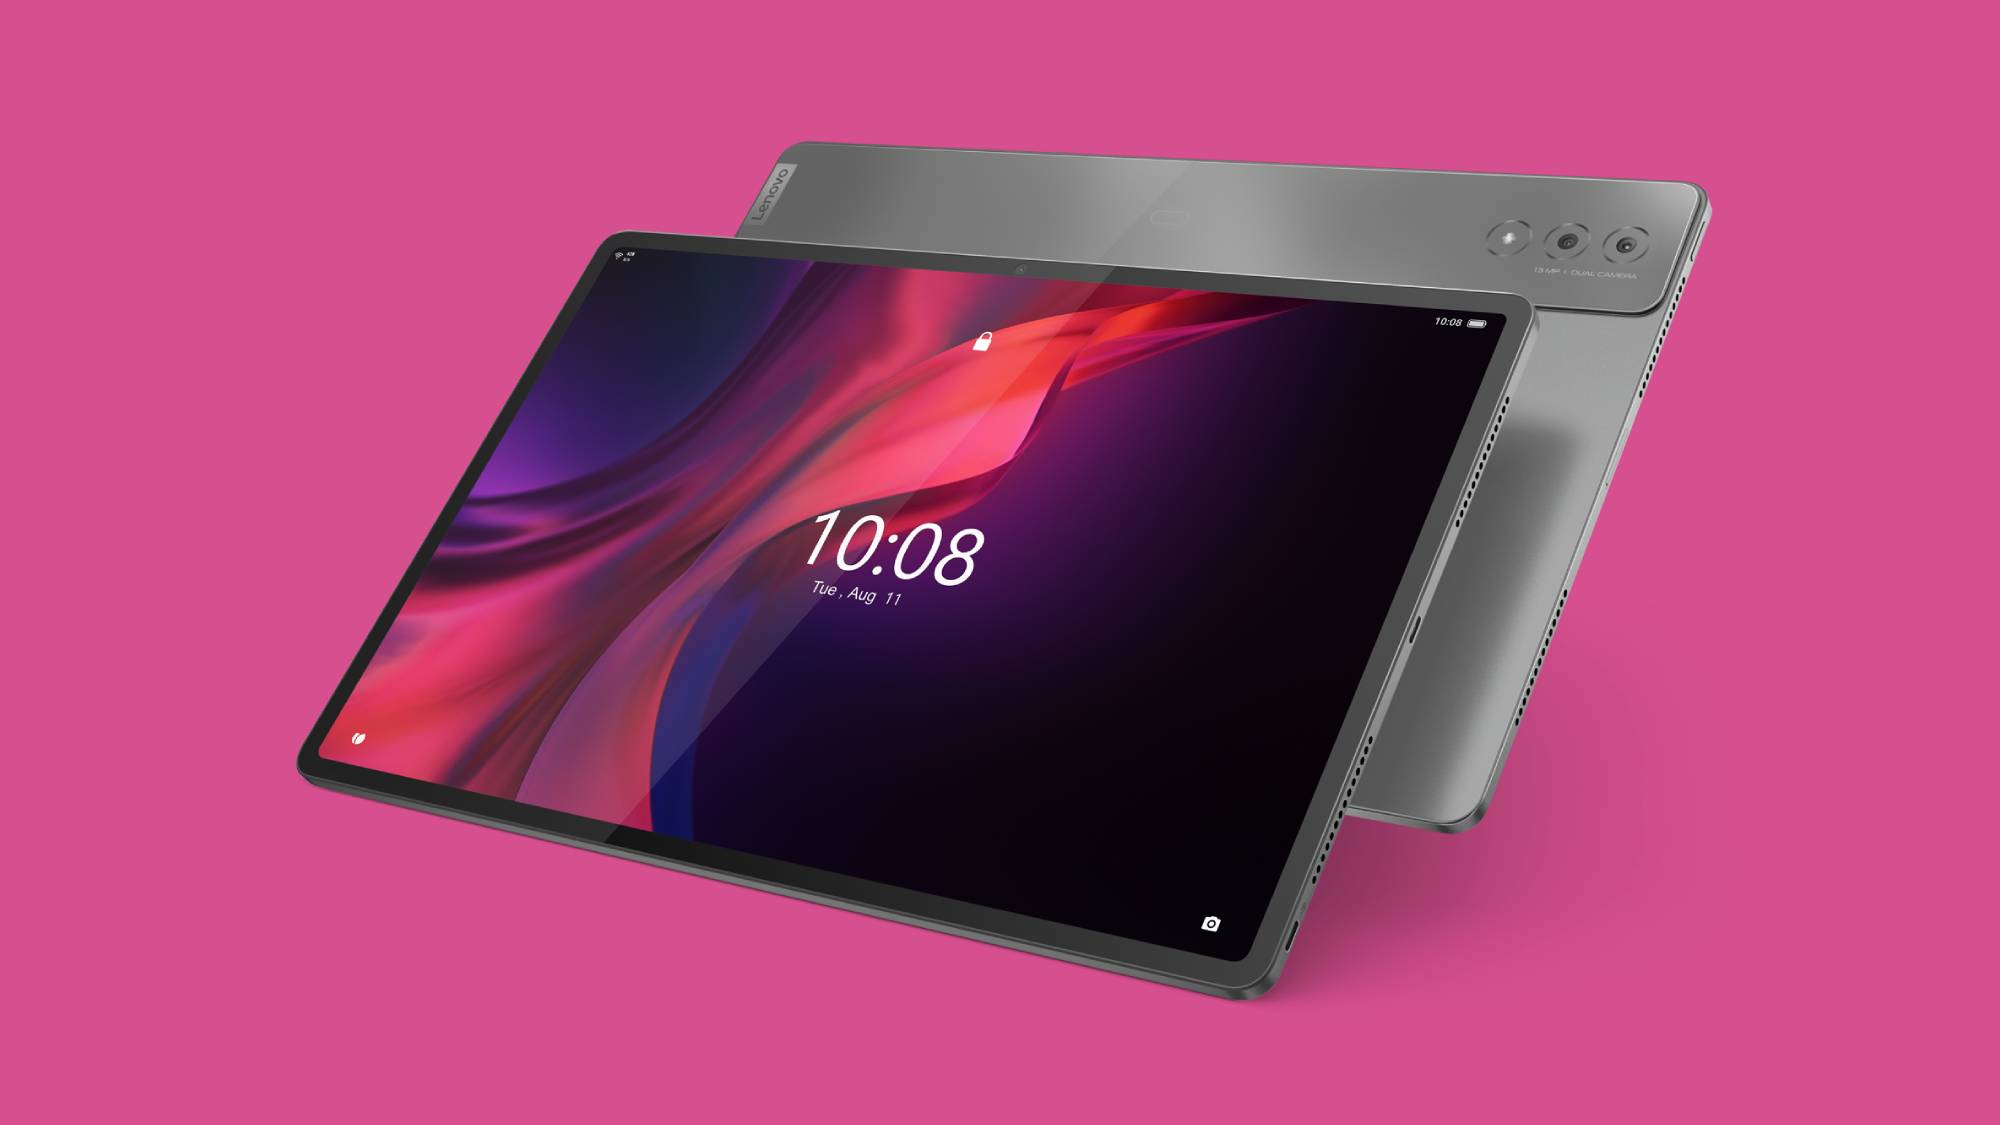 Lenovo Tab Extreme comes to CES 2023 to take on the iPad Pro